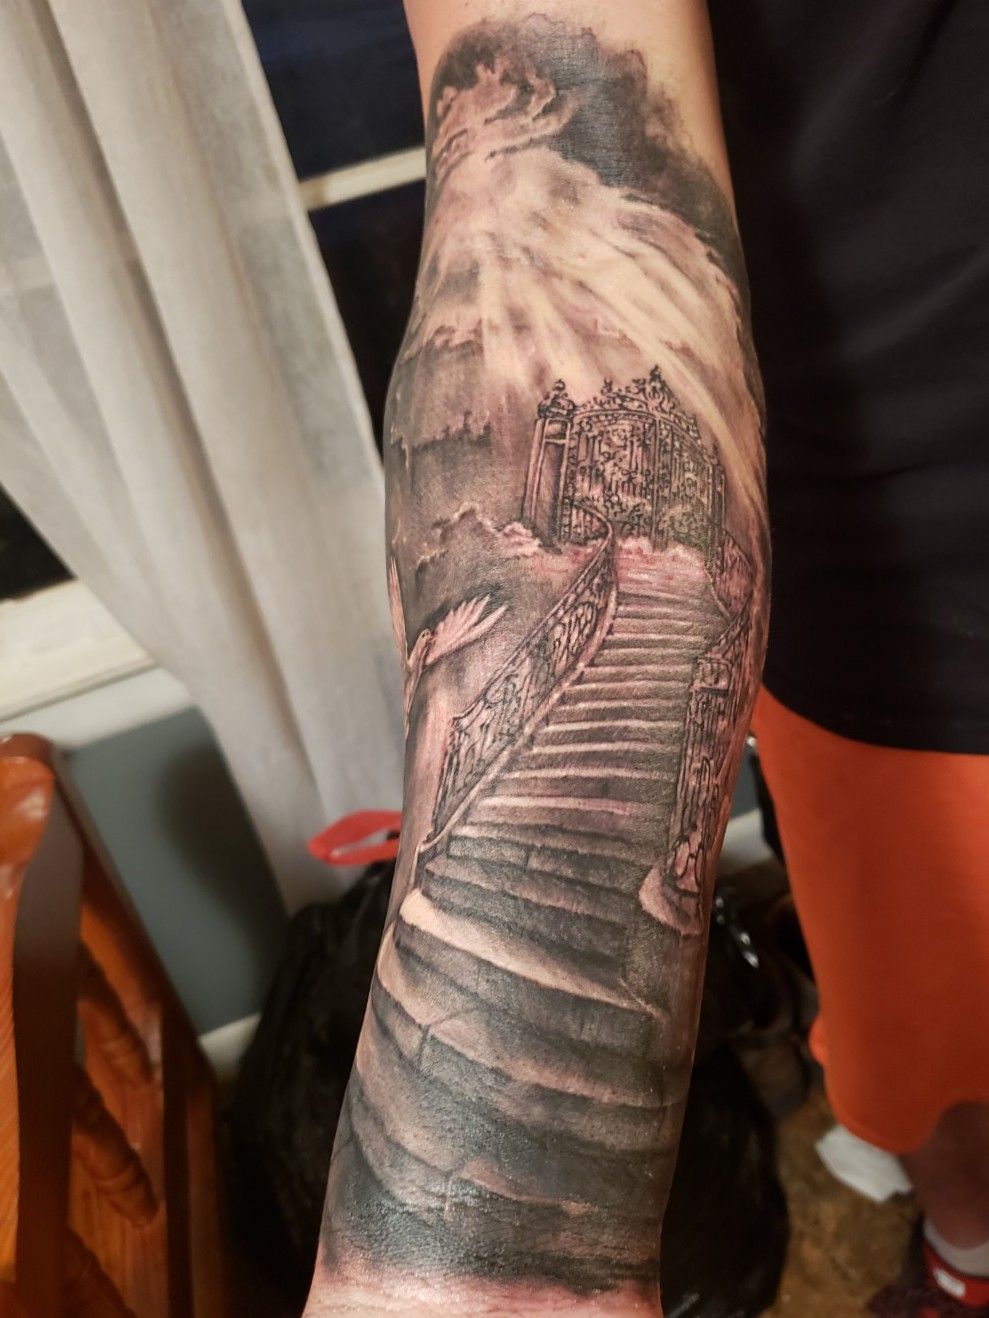 Great Gatsby Gate with Stairway to Heaven chest shoulder arm custom  tattoo by Mike Crinella  Great Gatsby Gate with Stairway to Heaven  chest shoulder arm custom tattoo Time for some ink